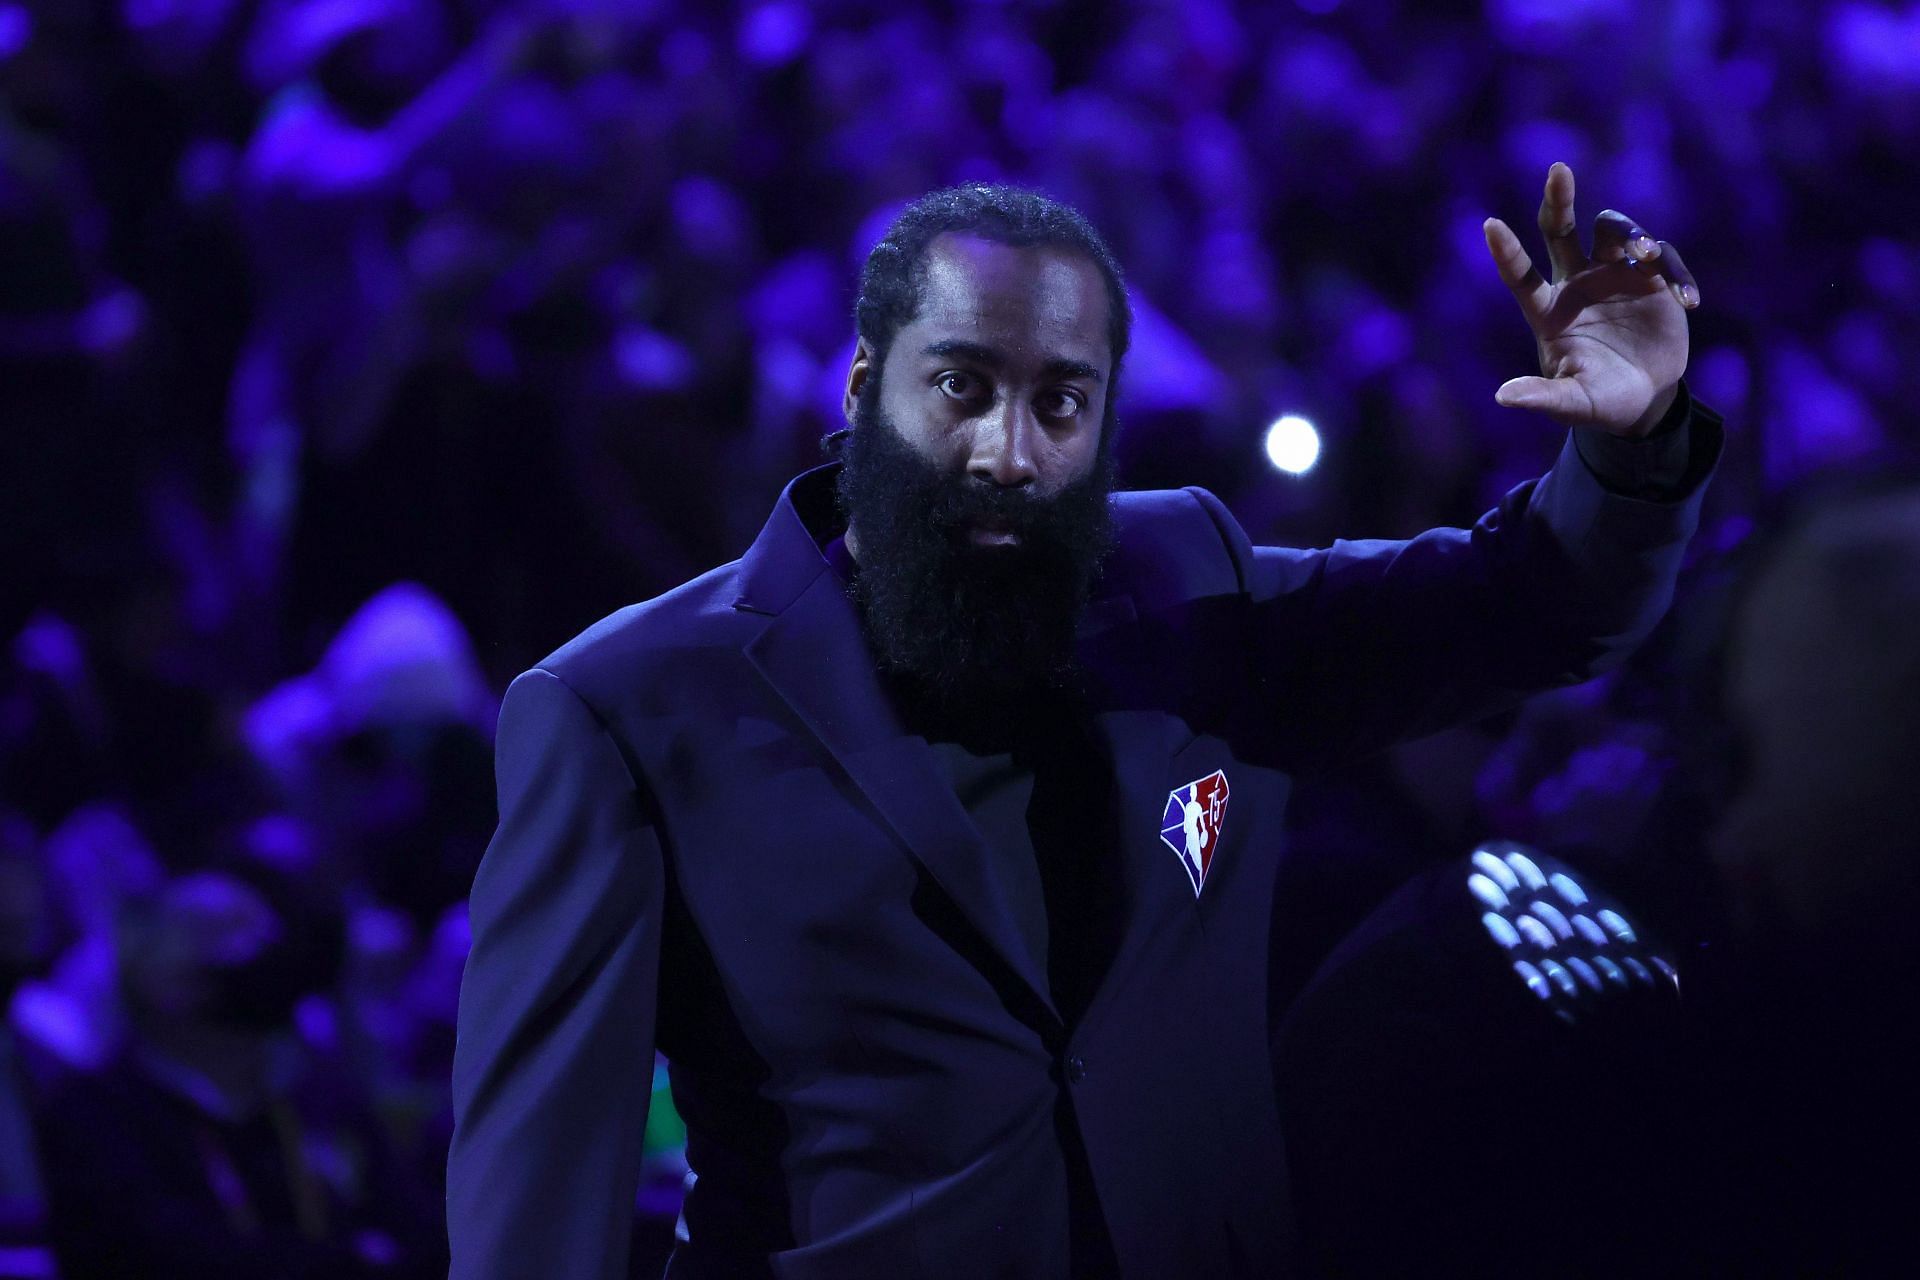 James Harden reacts after being introduced as part of the NBA 75th Anniversary Team